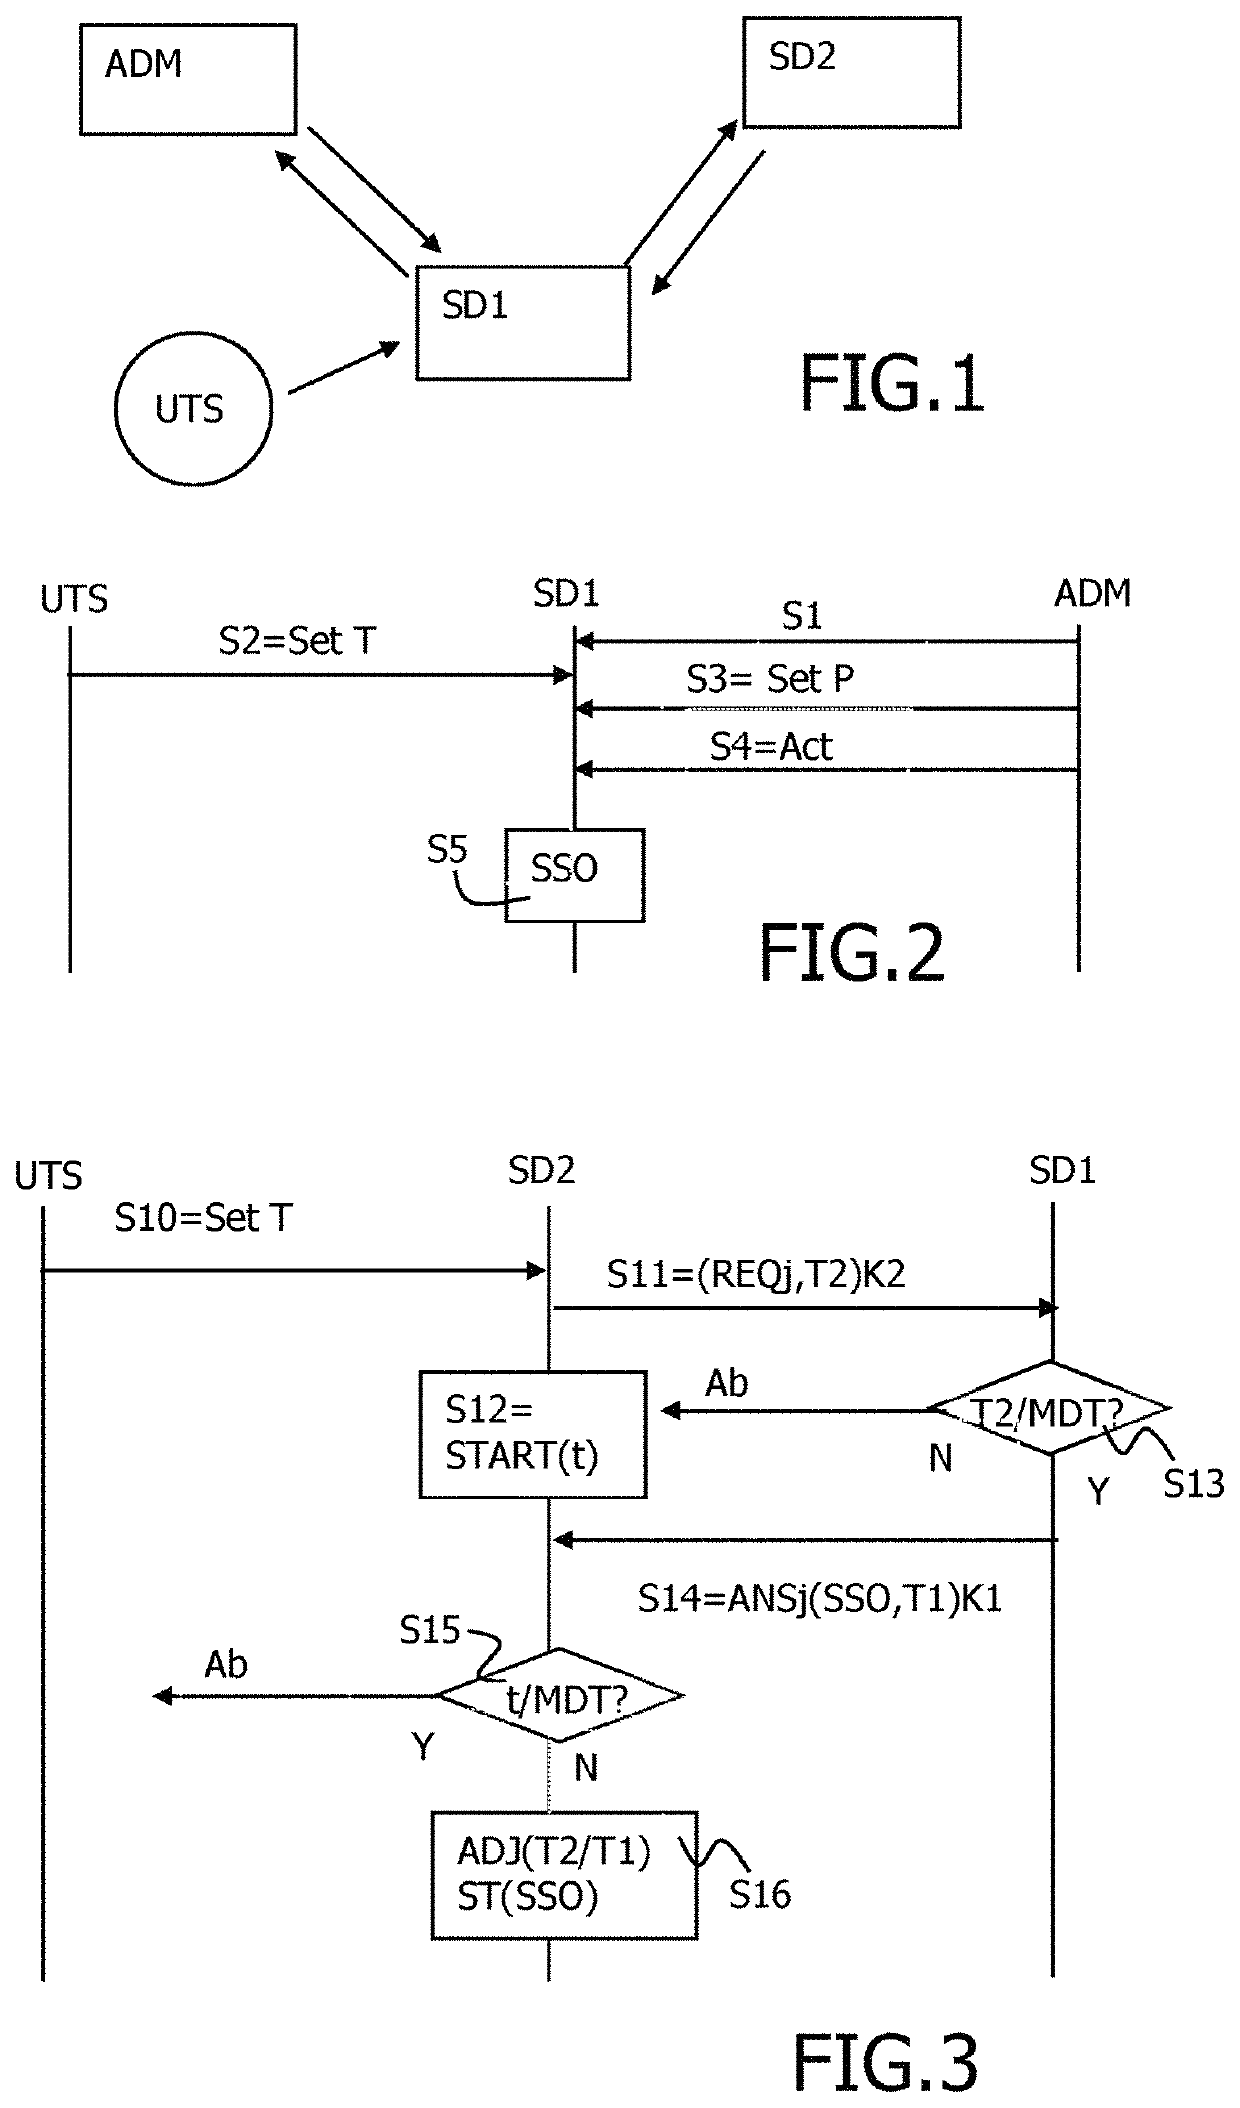 Method to create a trusted pool of devices